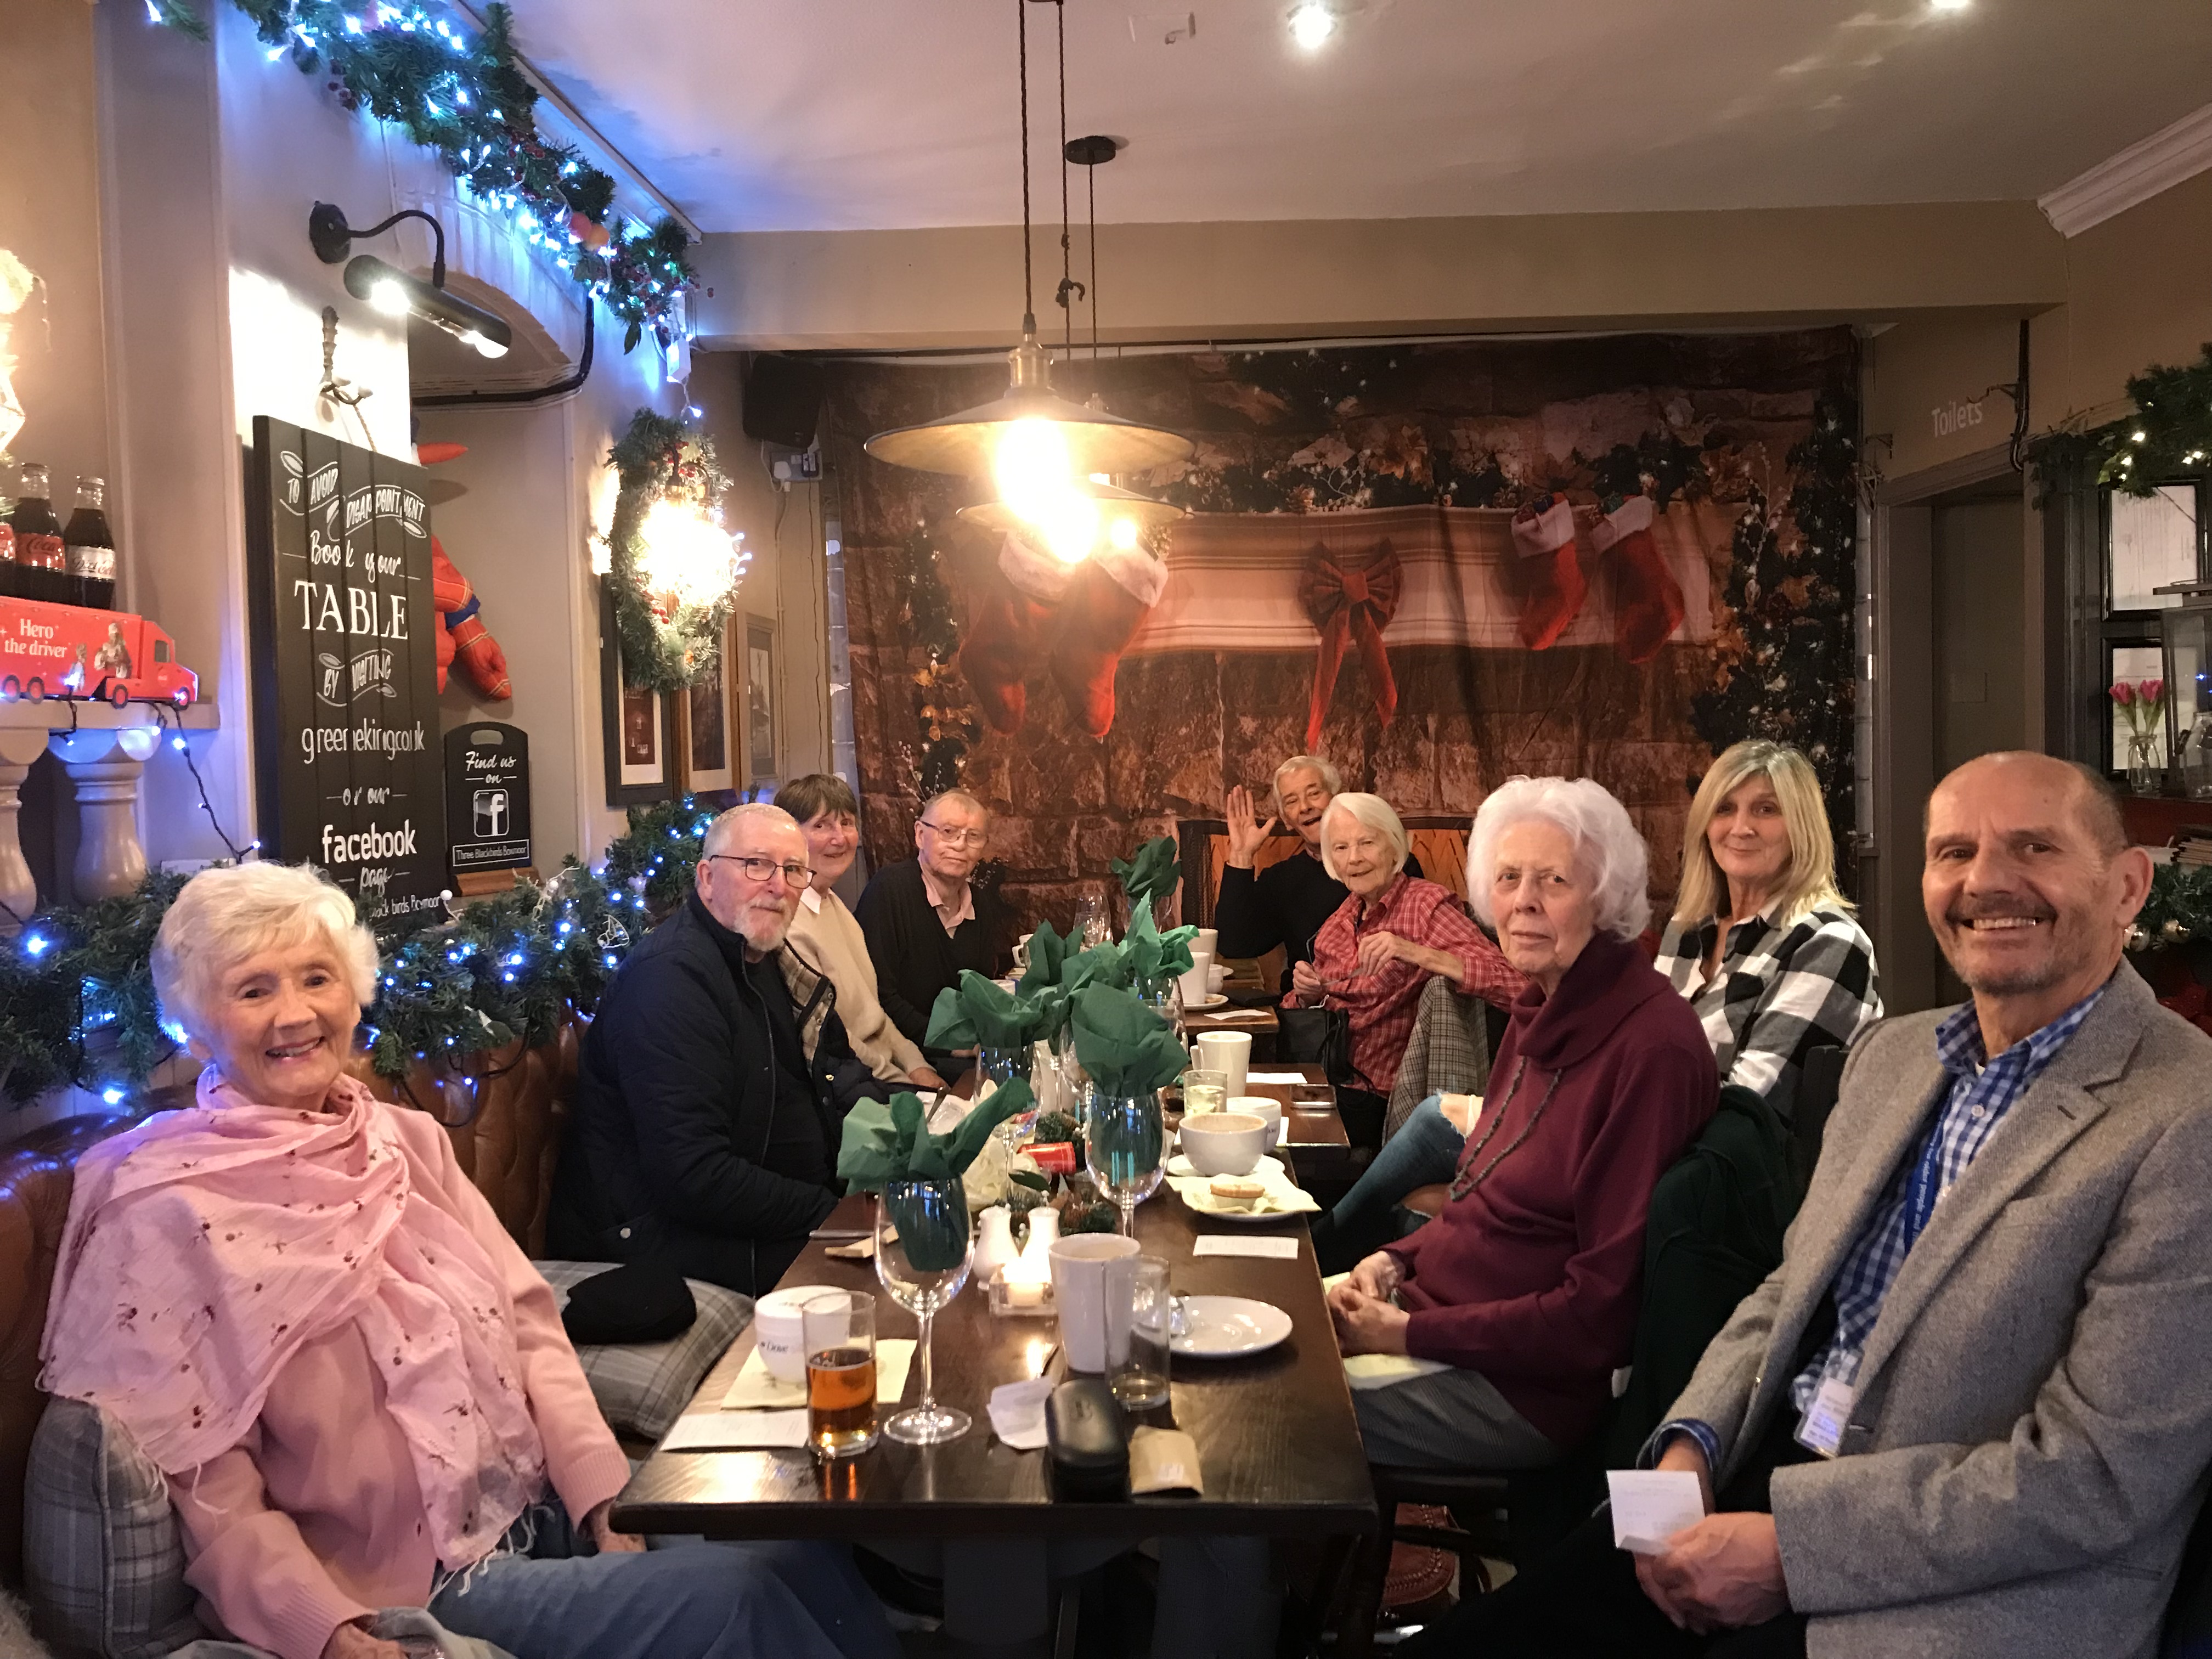 The last event for 2021 was a festive one when a group of our neighbours enjoyed a traditional Turkey lunch with all the trimmings and a glass or two of refreshment served by the attentive staff at the Three Blackbirds.